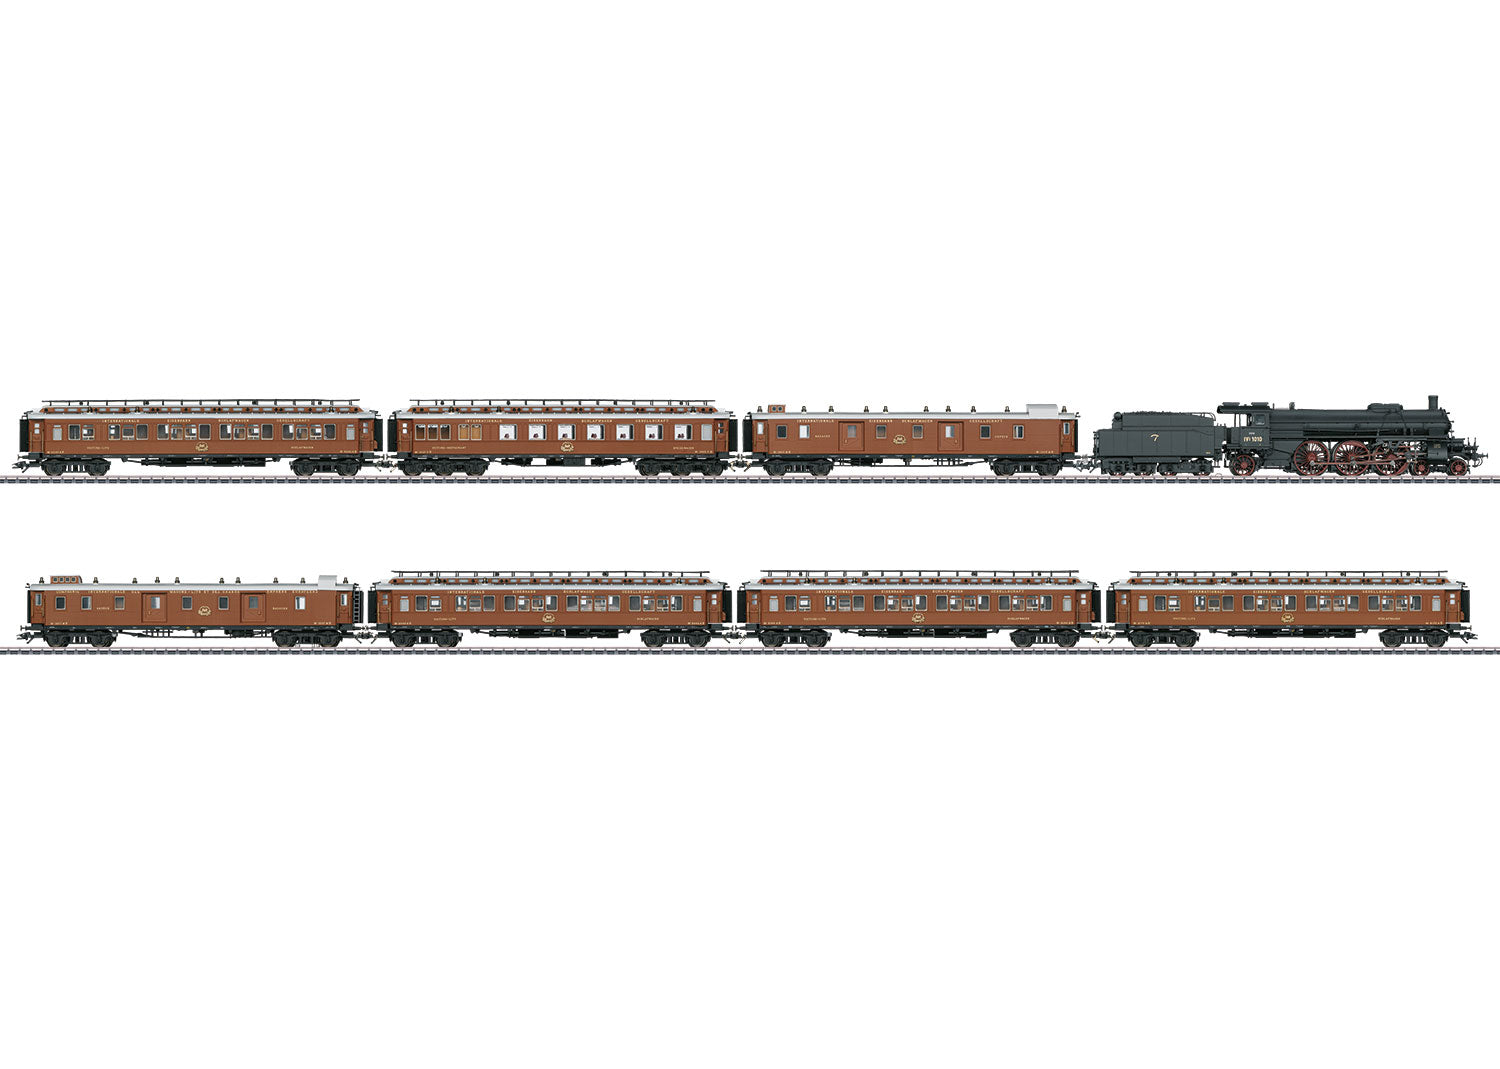 Feeling excited about Orient Express by Maerklin